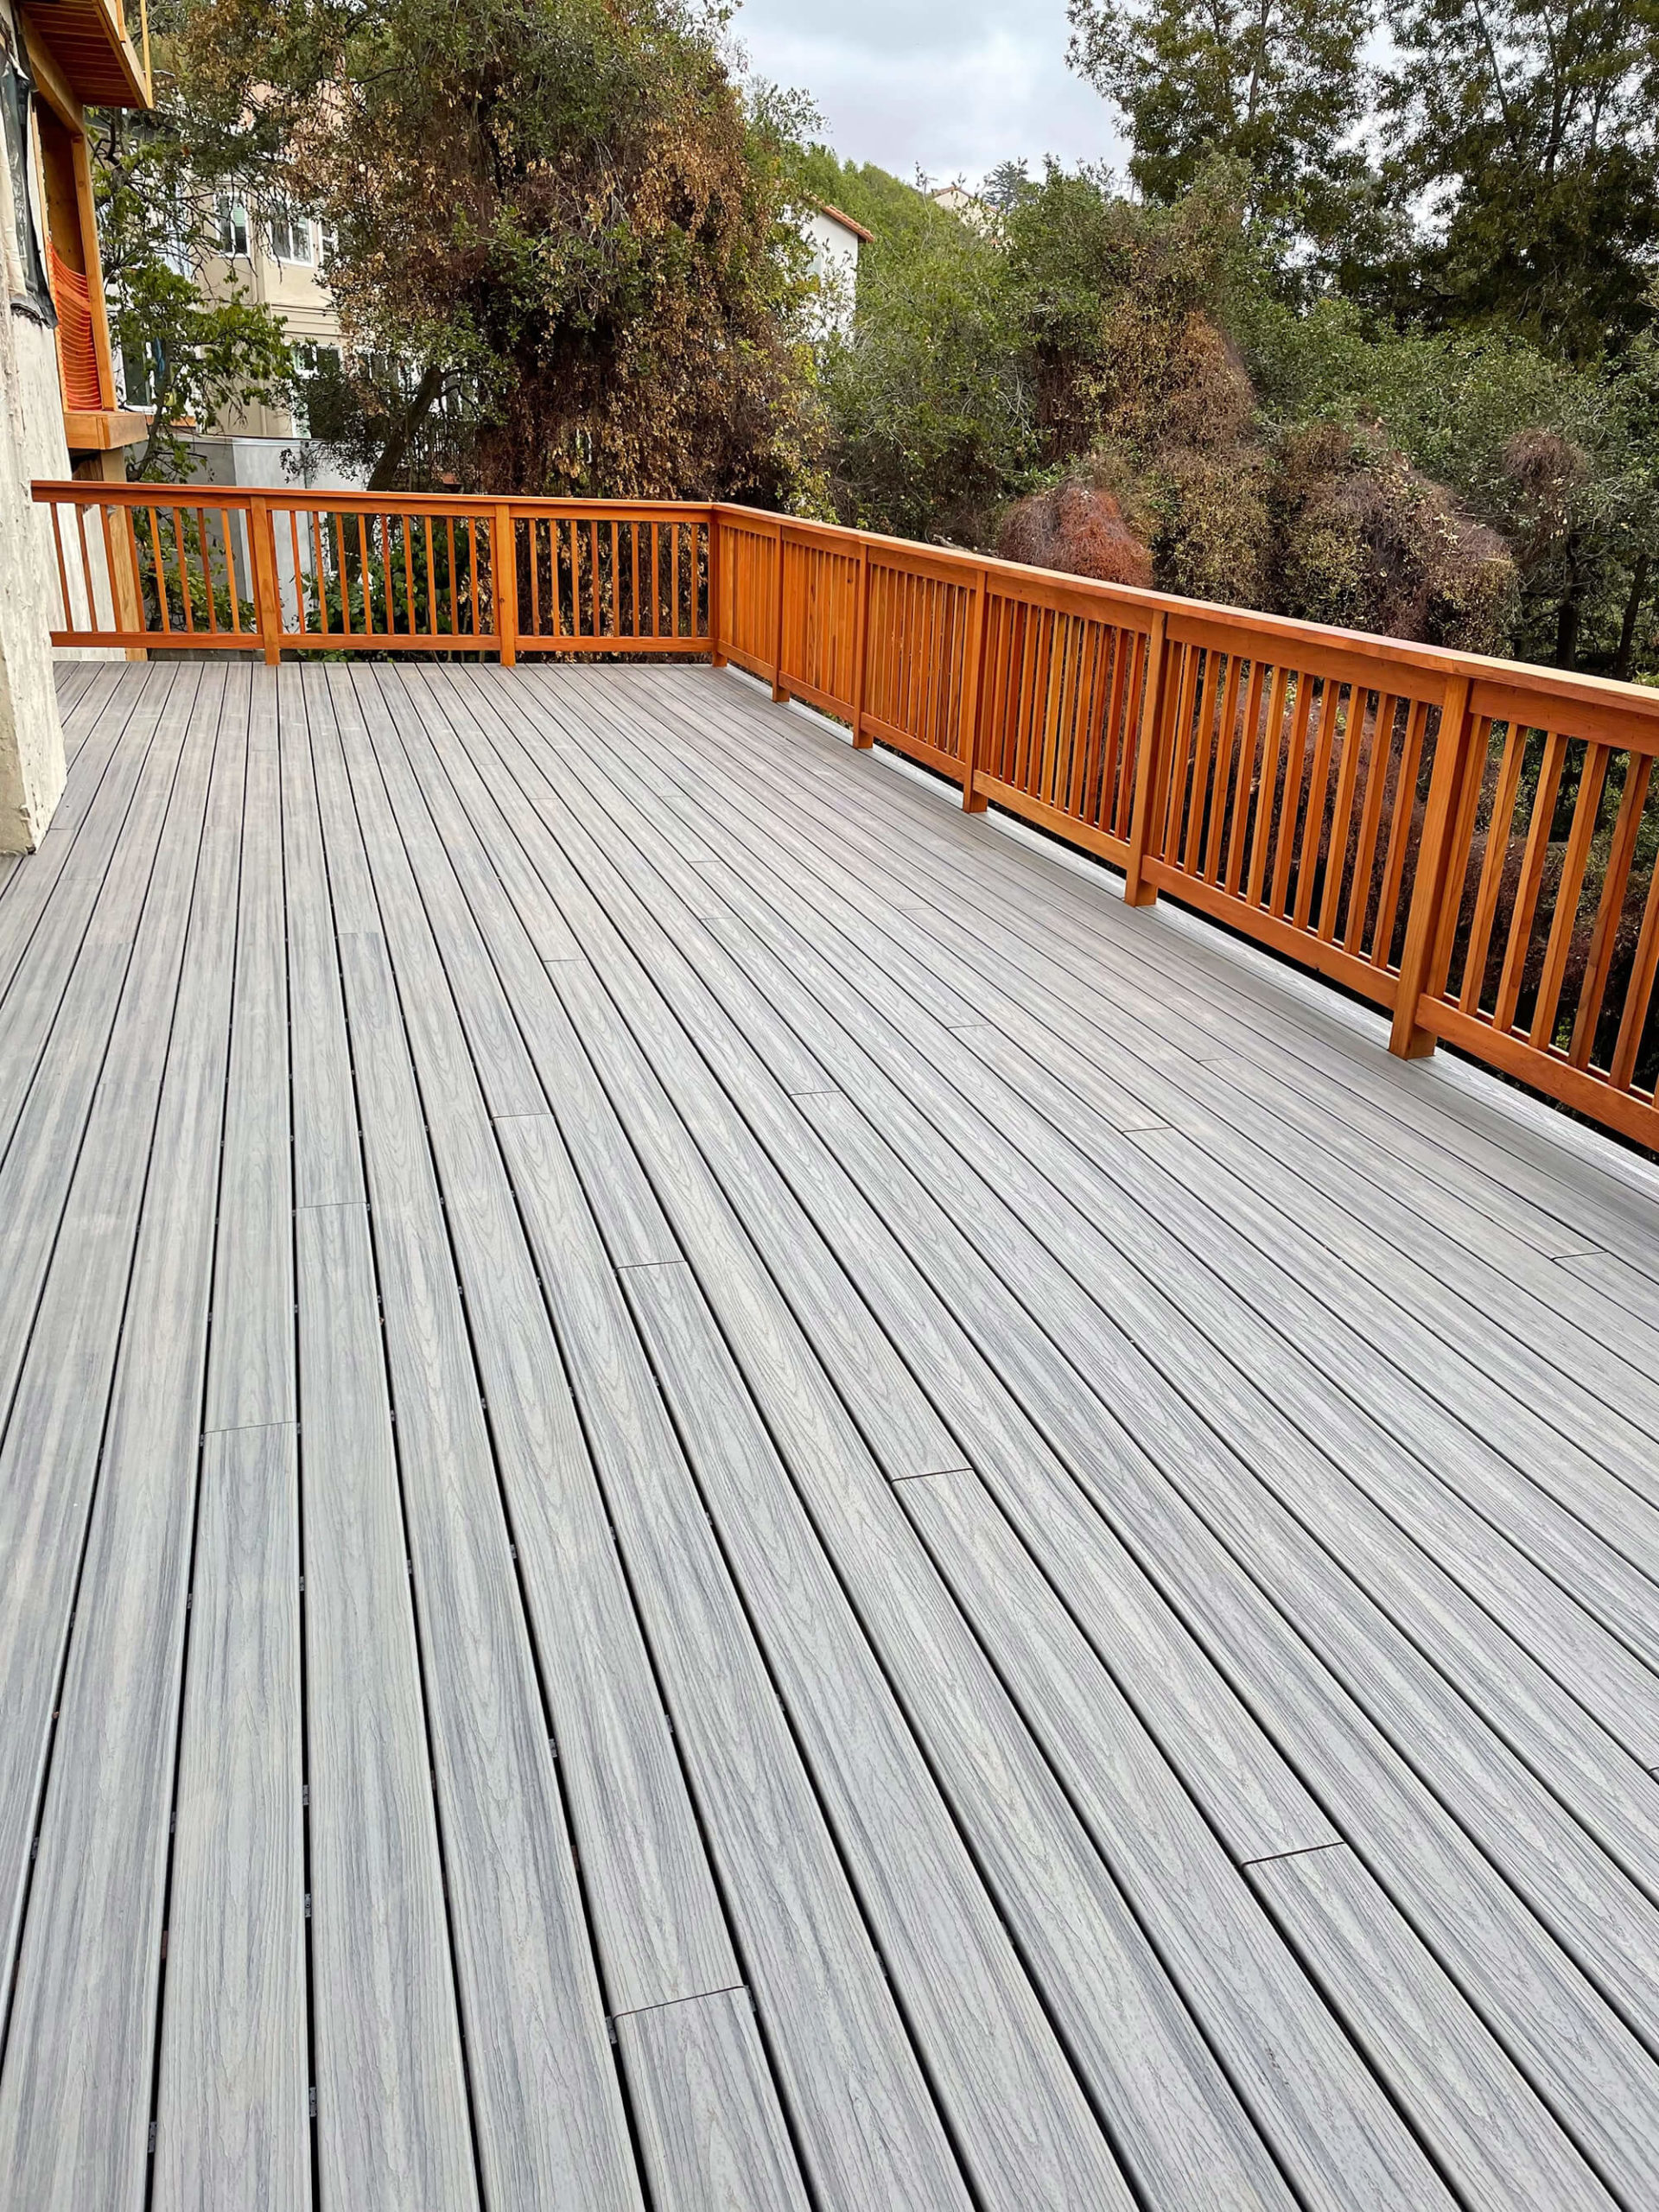 Custom deck installation in San Leandro with natural redwood railing and reclaimed decking